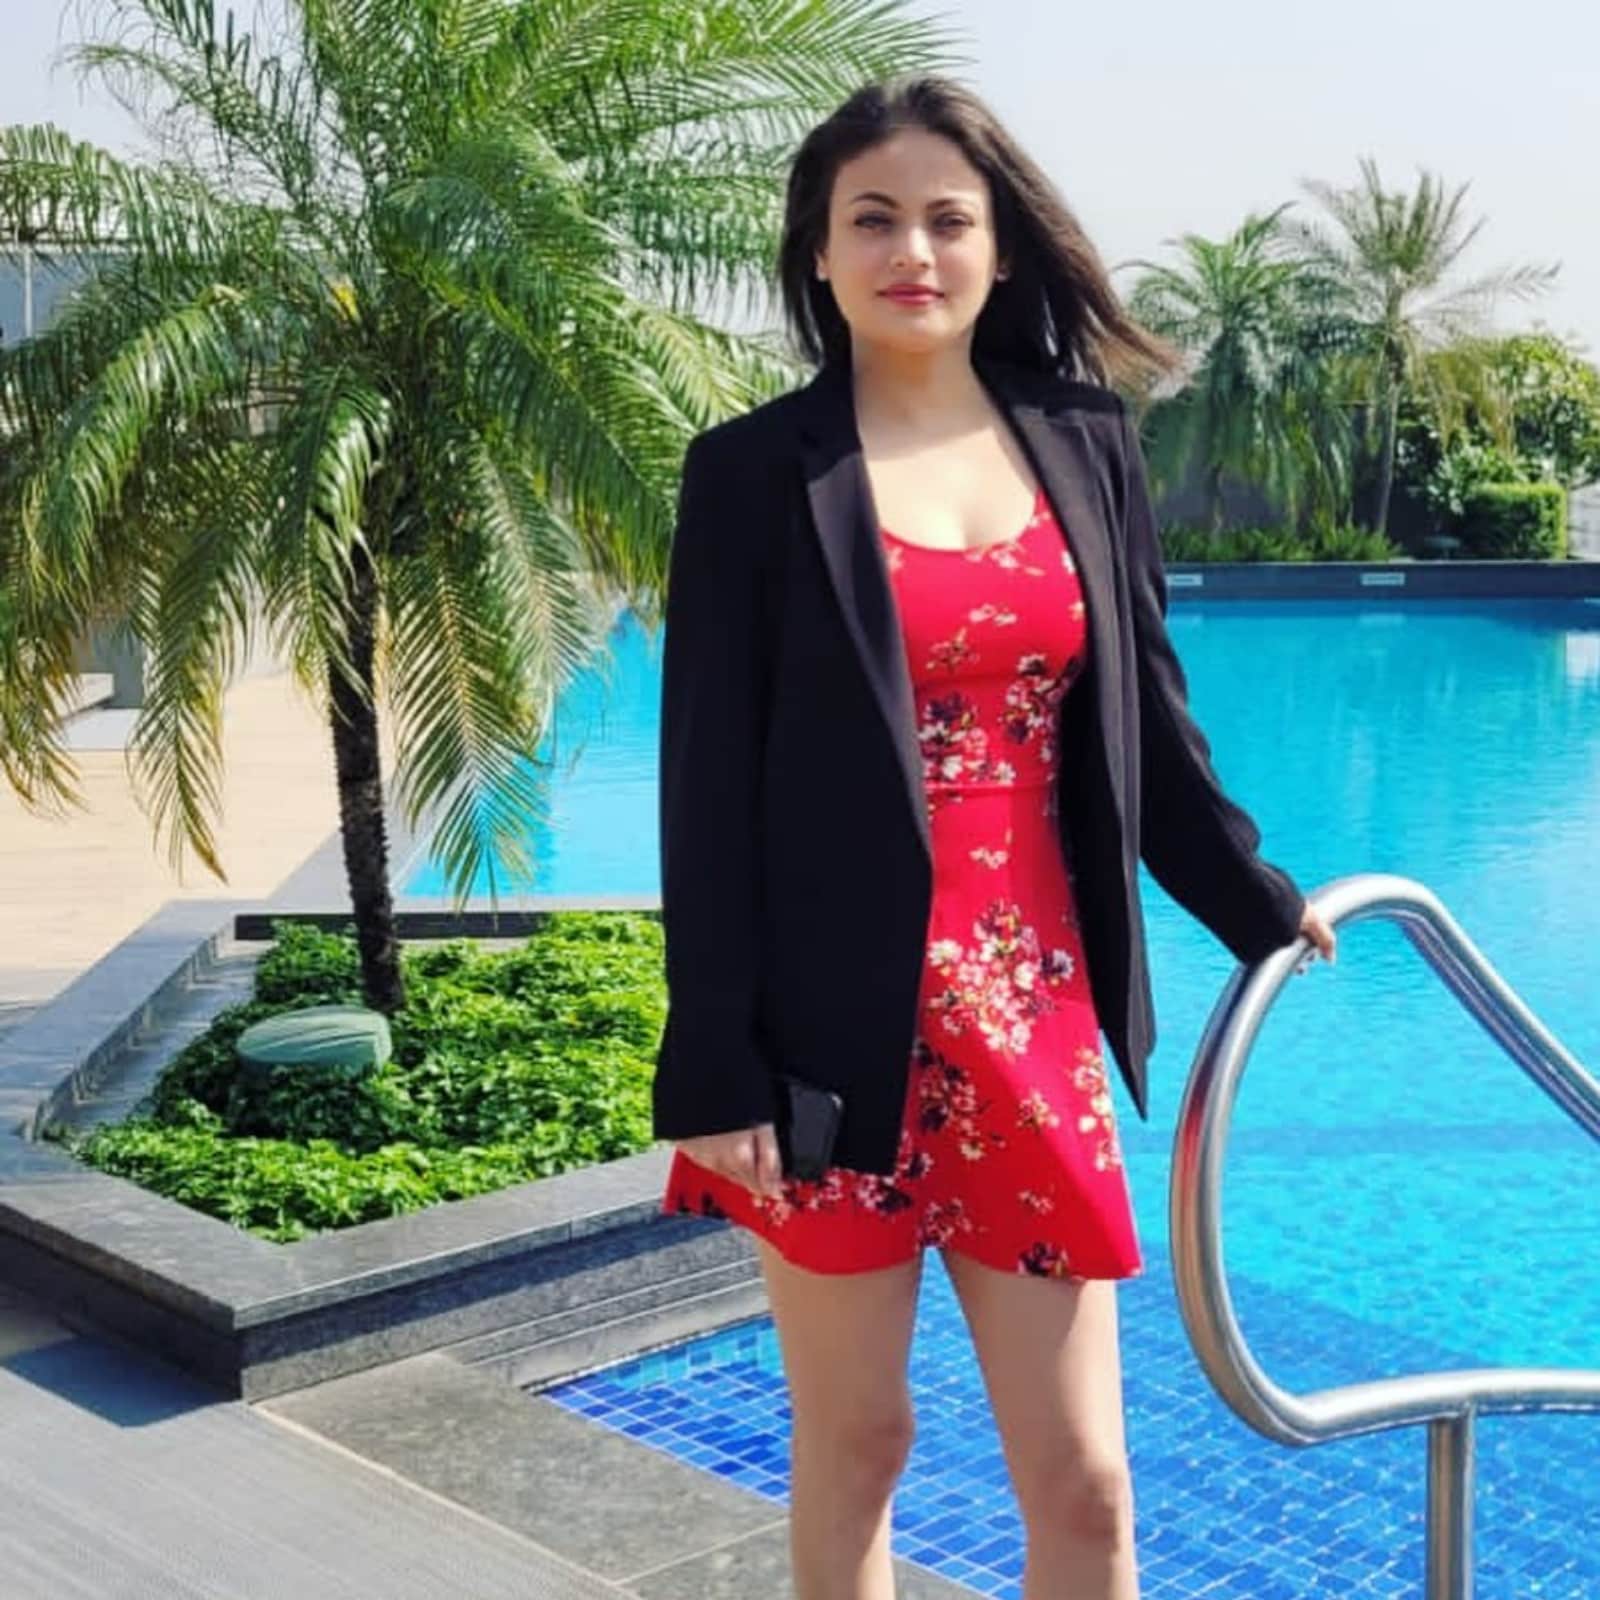 Sex Sneha - Sneha Ullal Reveals Turning Down Hollywood Film That Demanded 'Absolute  Full-On Nudity' - News18